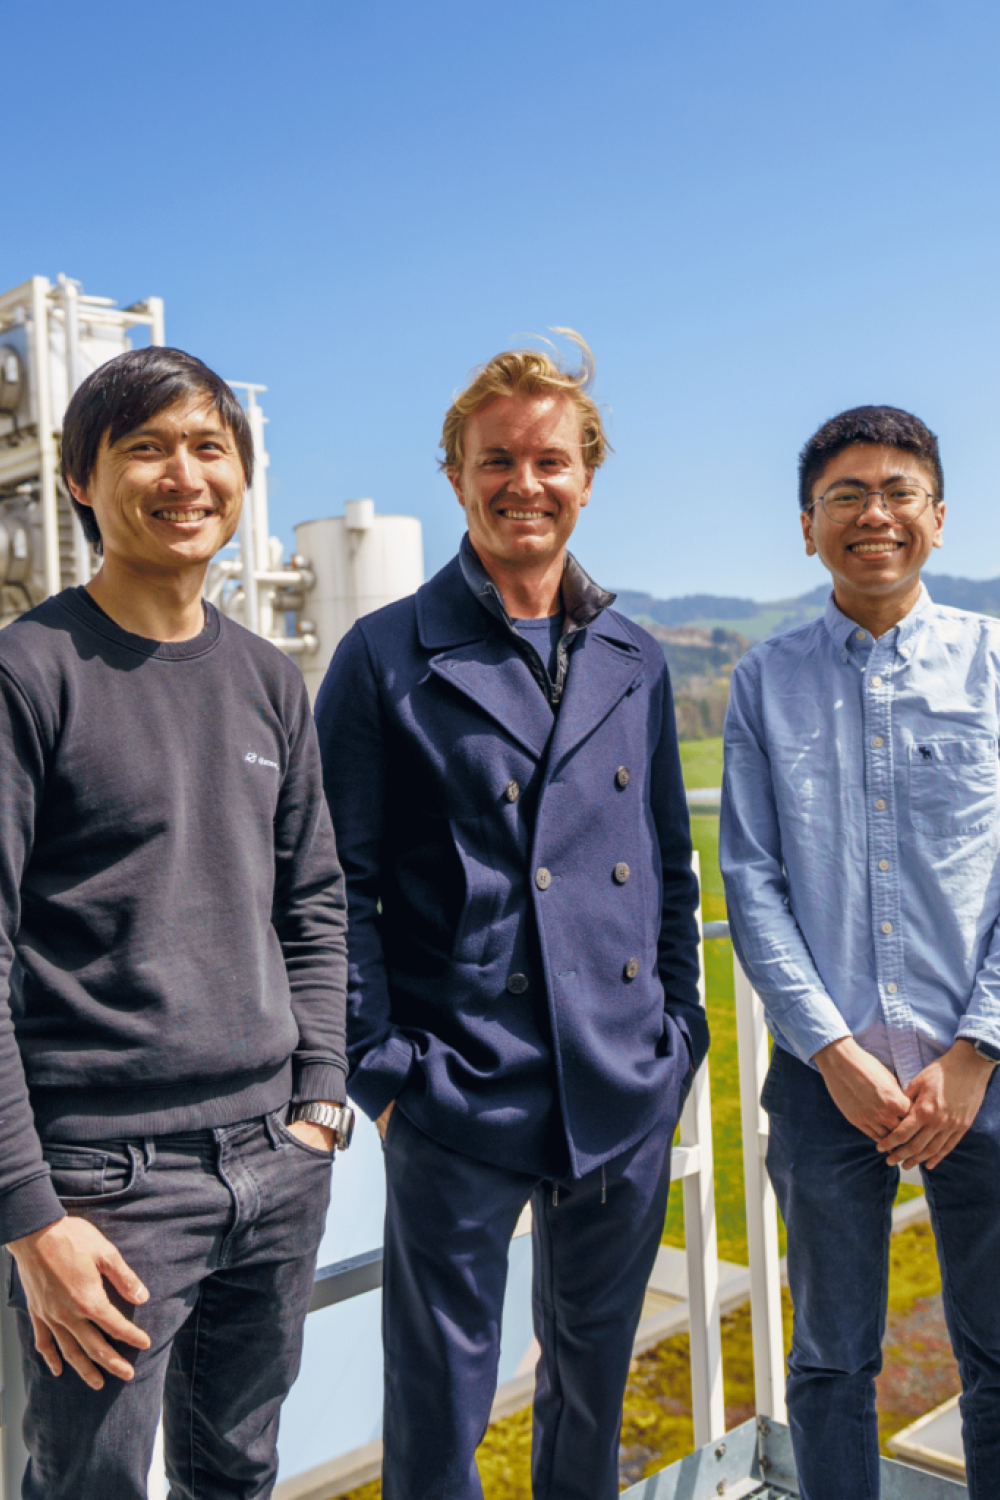 nico rosberg pictured with sdg lab members